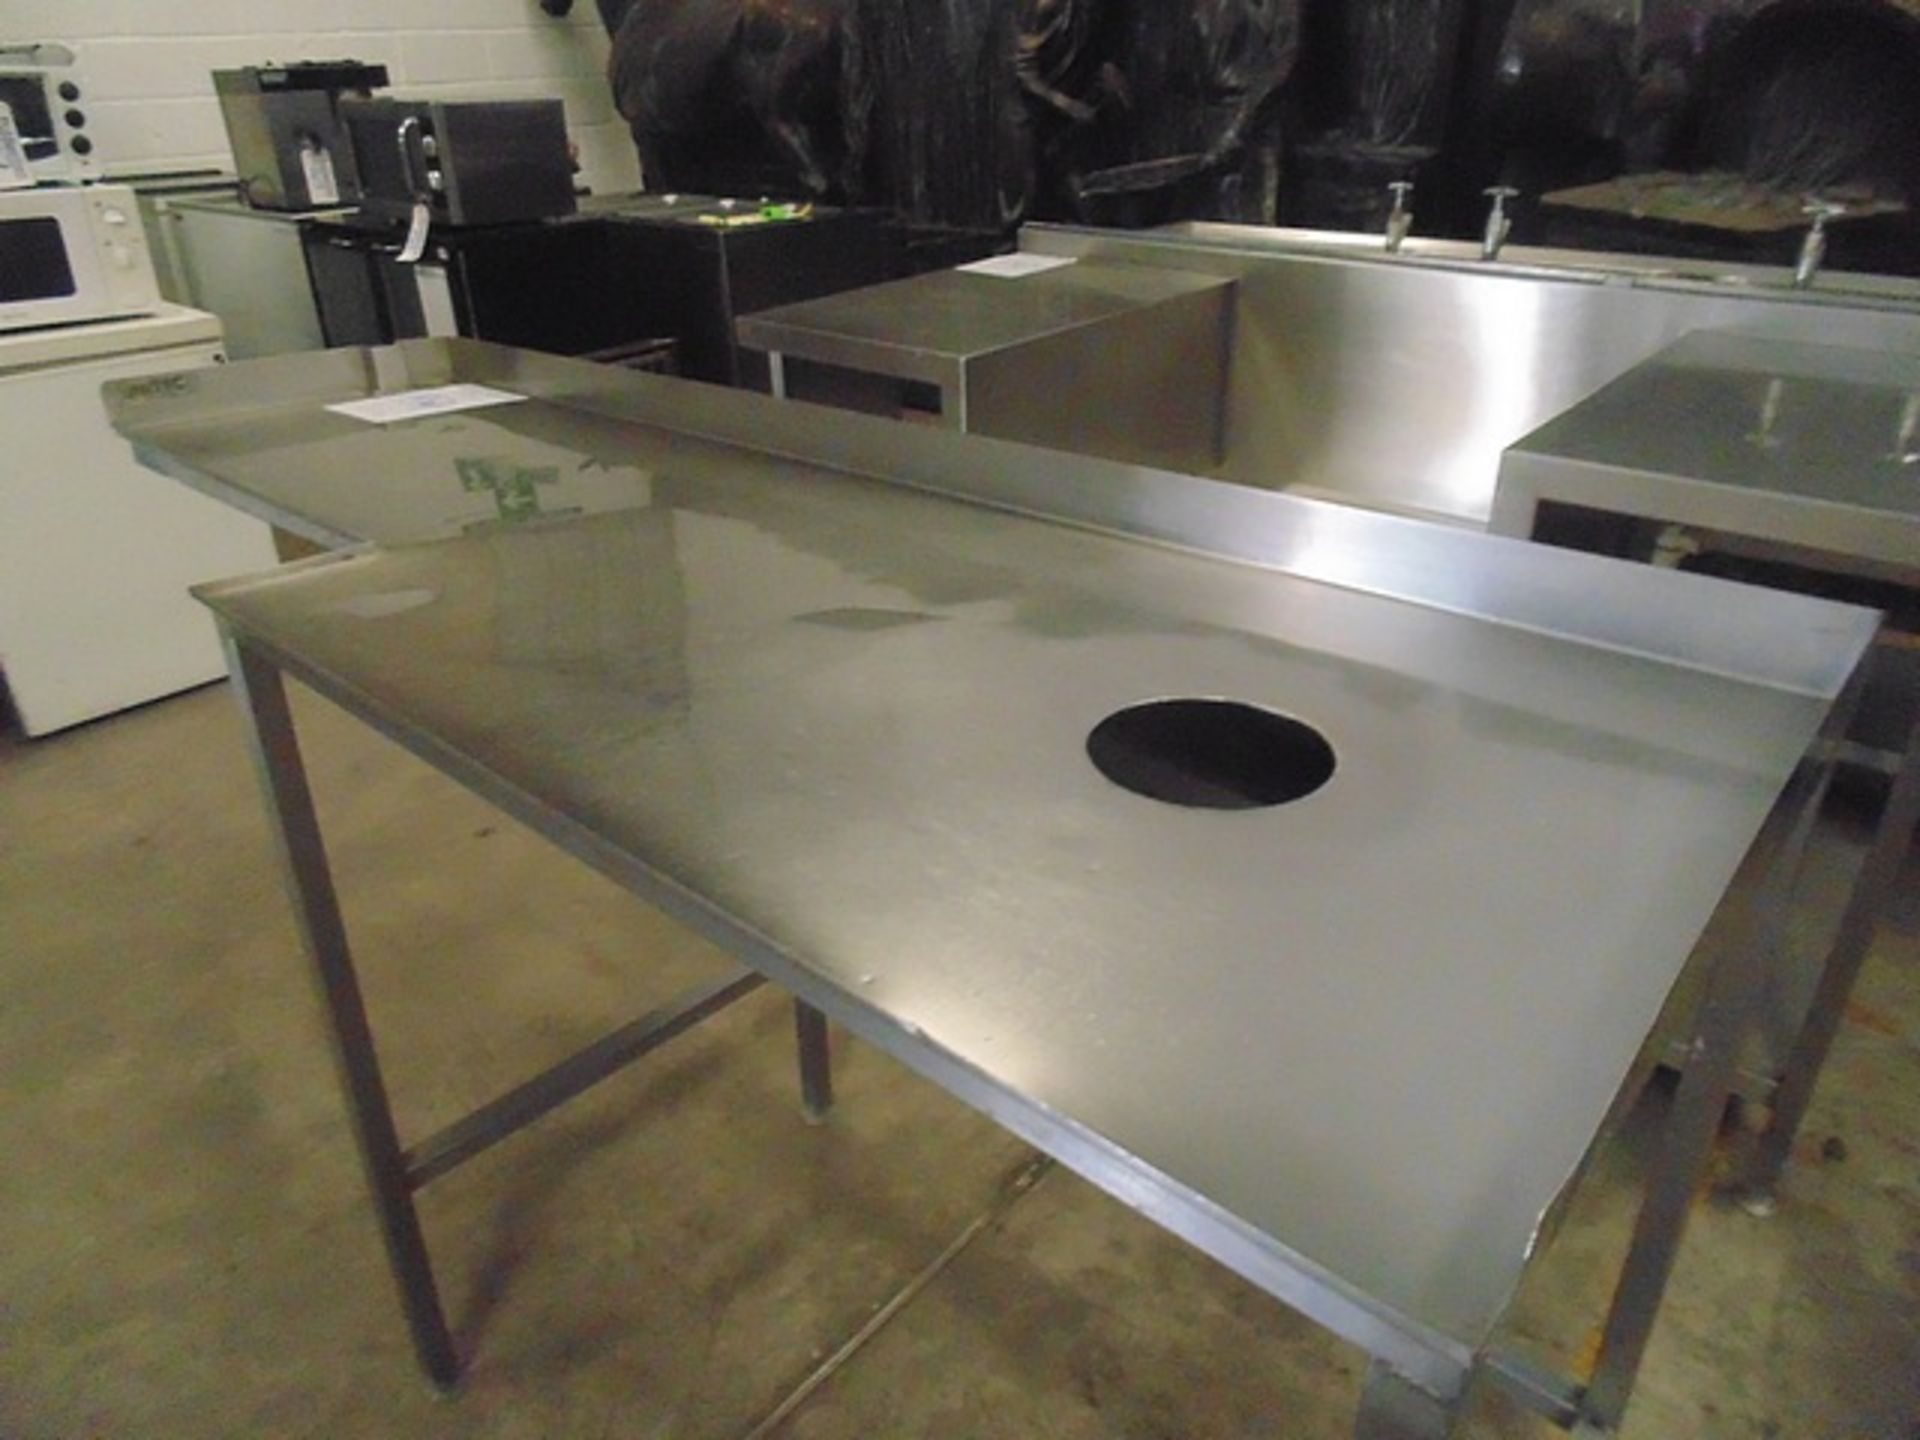 Stainless steel dishwasher tabling 1730mm x 600mm x 960mm